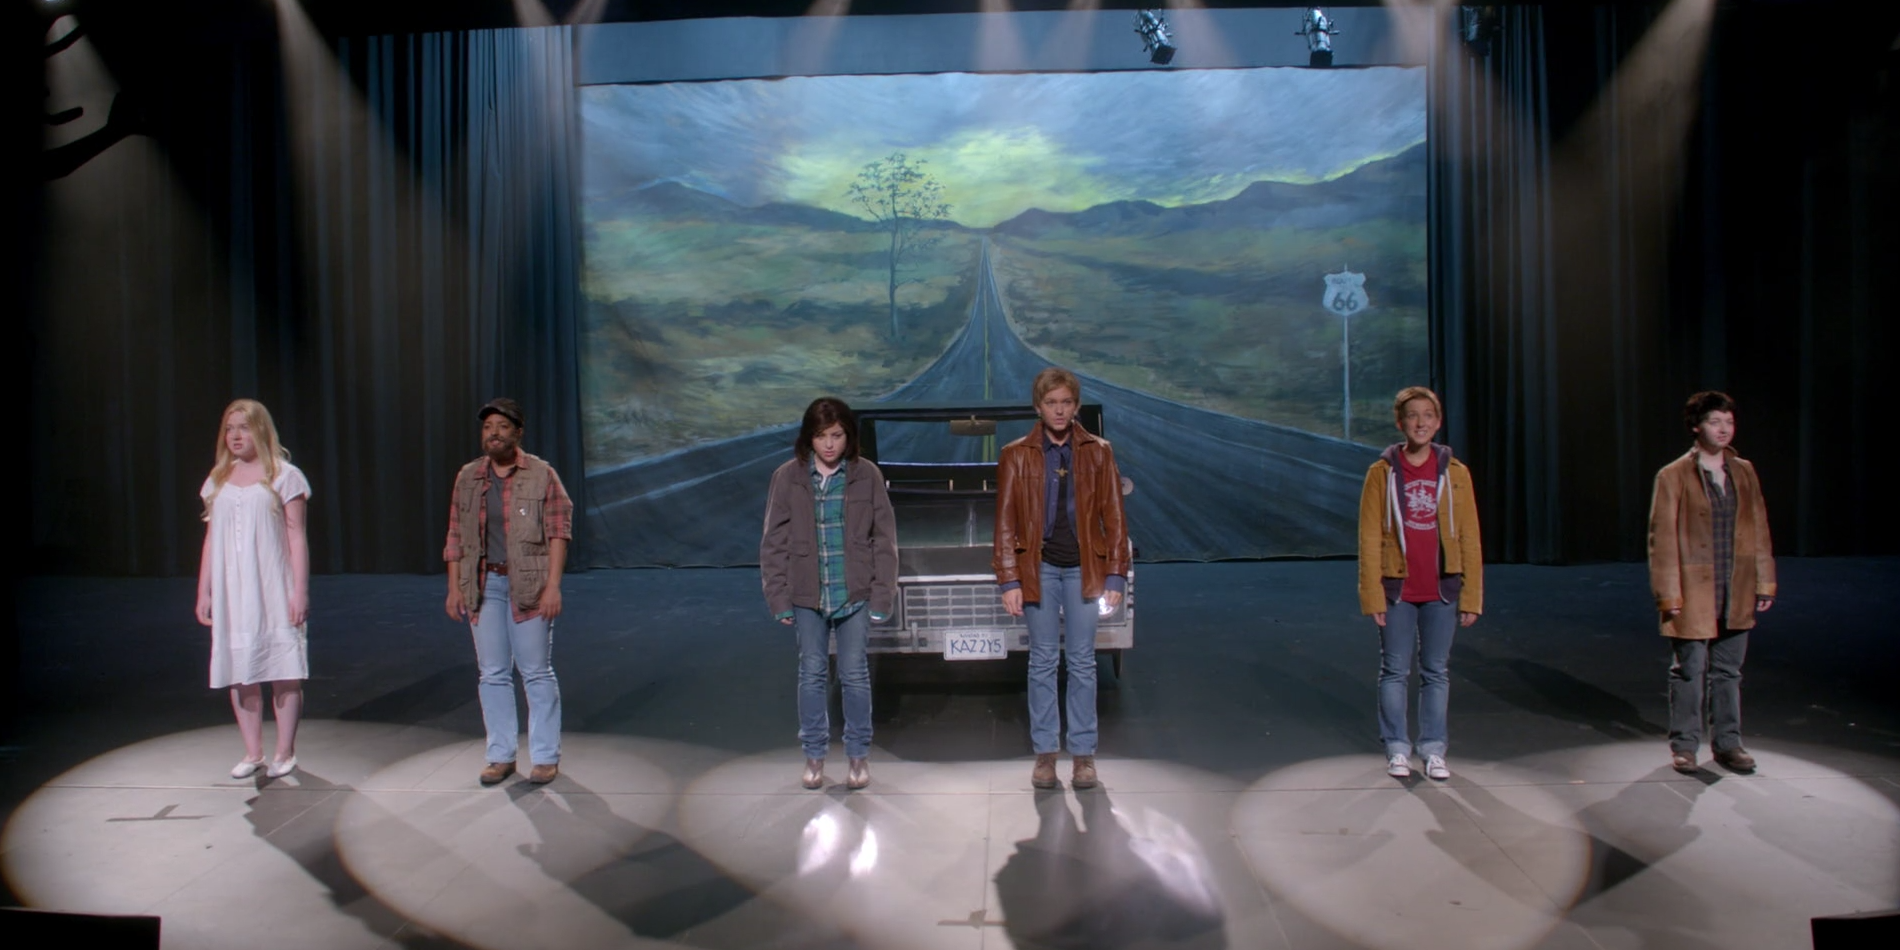 The Supernatural musical cast sing their rendtiion of Carry On Wayward Son